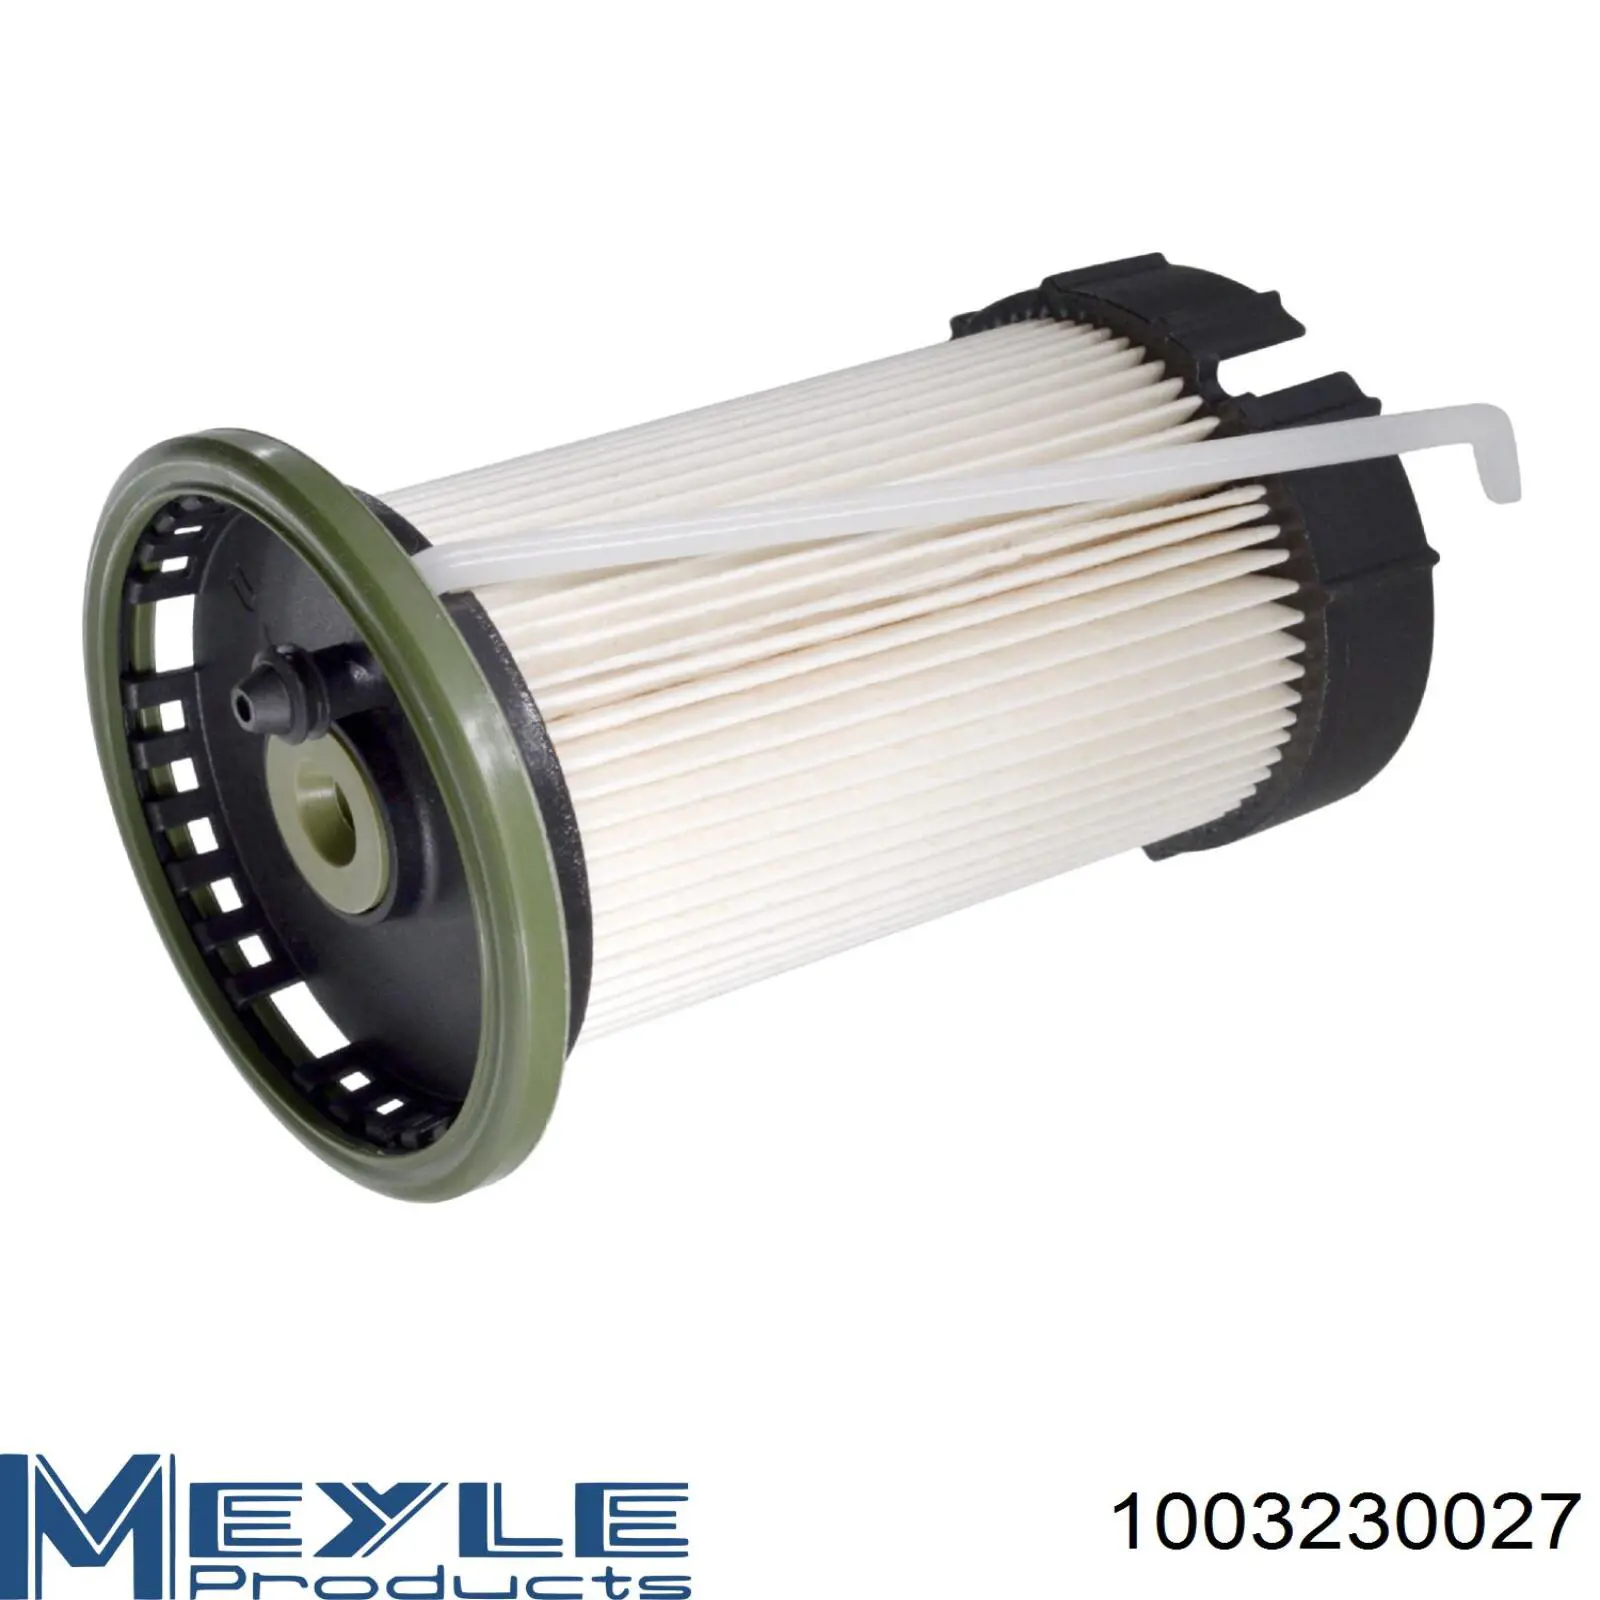 100 323 0027 Meyle filtro combustible